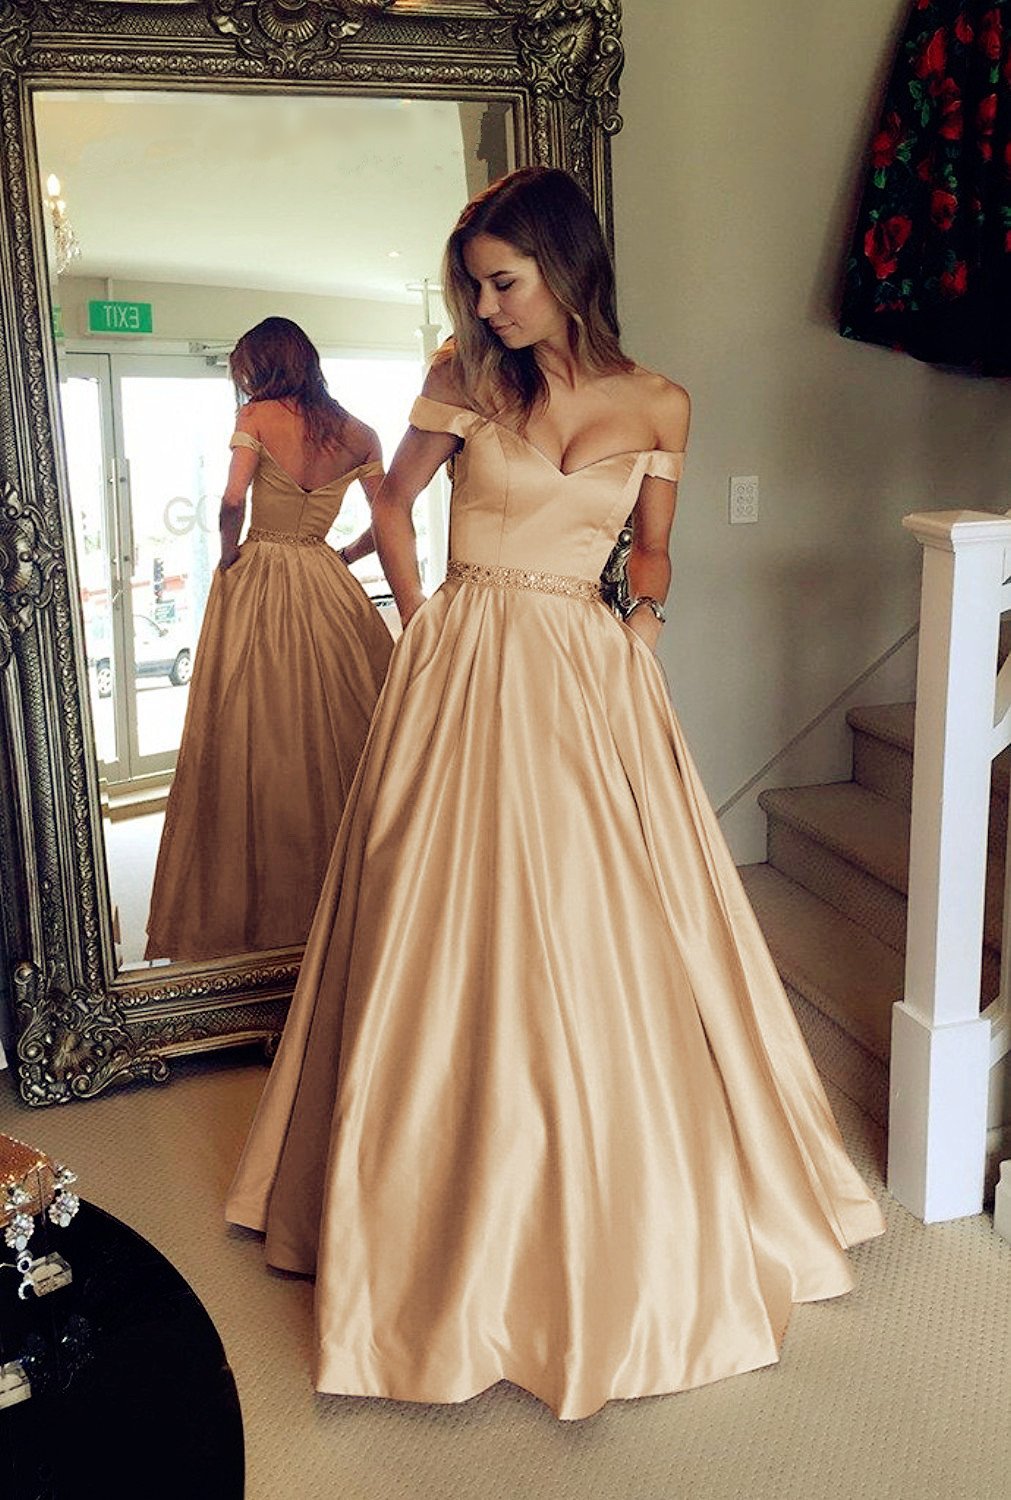 V Neck Off The Shoulder Satin Prom Dresses 2019 Evening Gowns Beaded Sashes